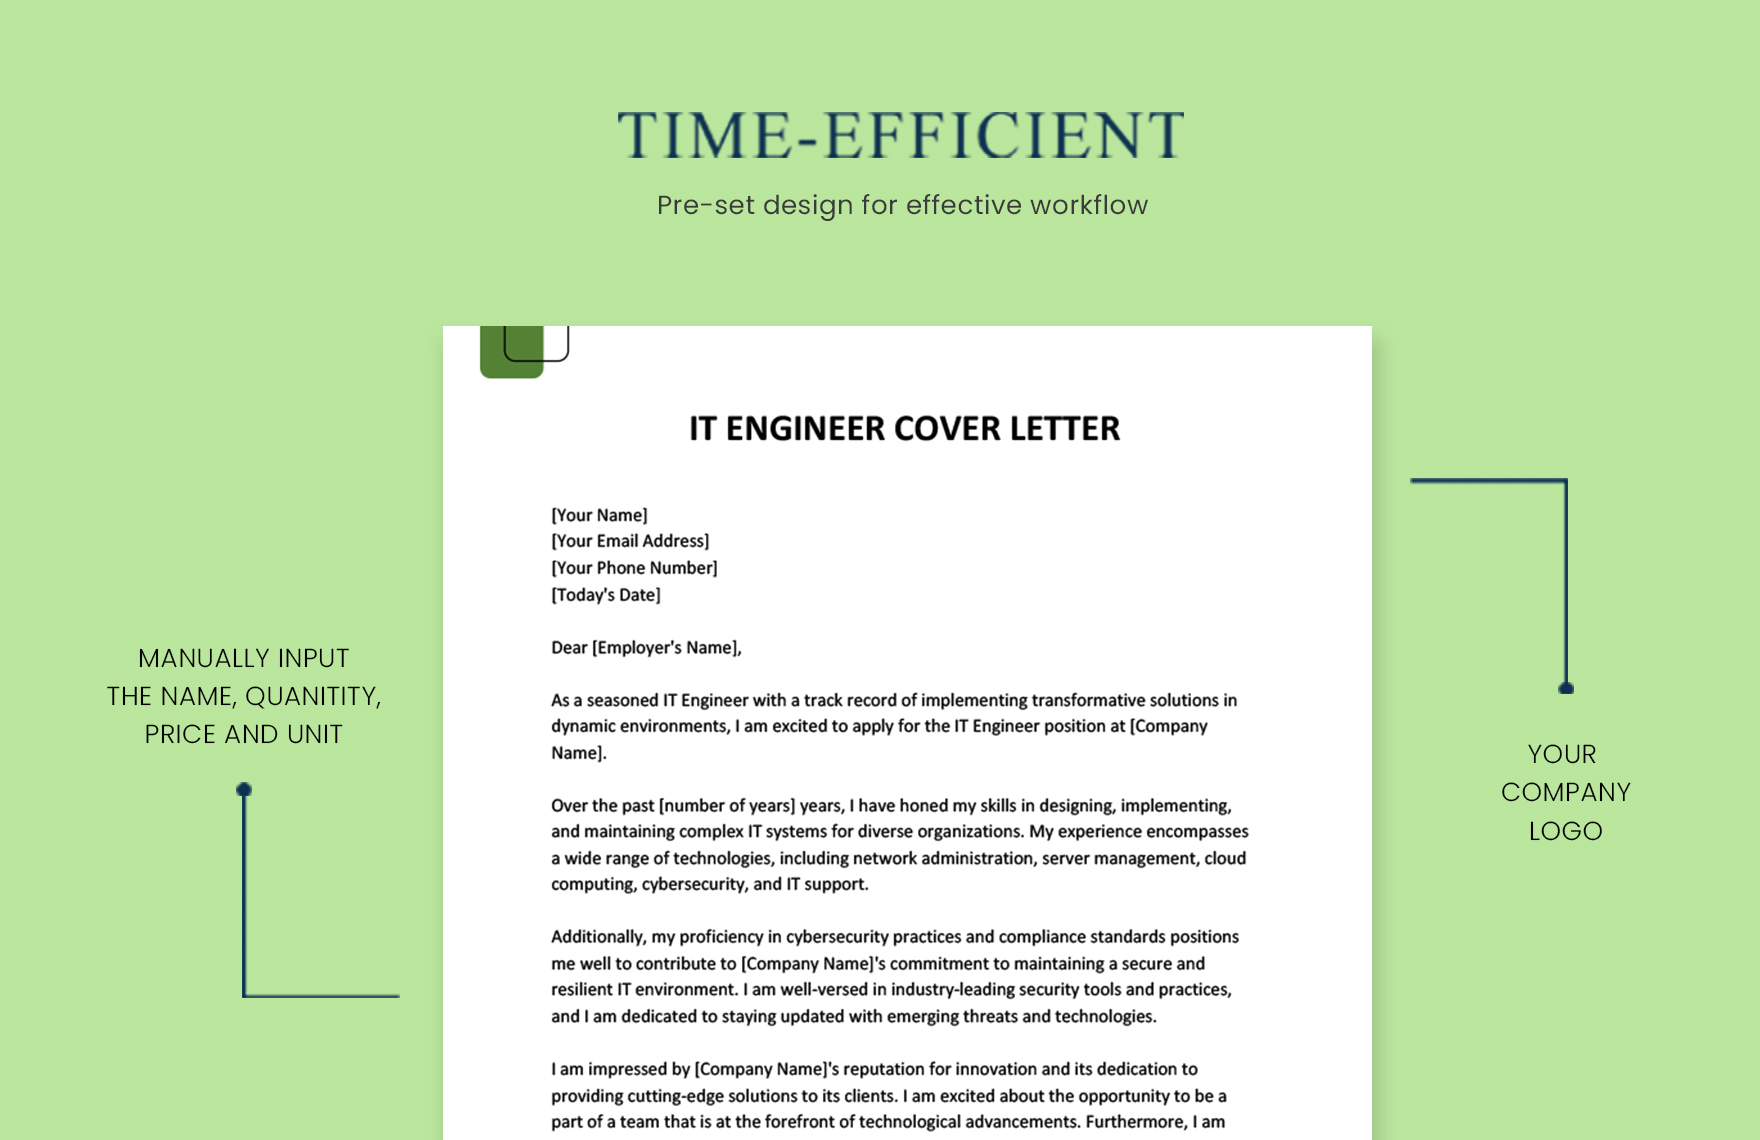 IT Engineer Cover Letter